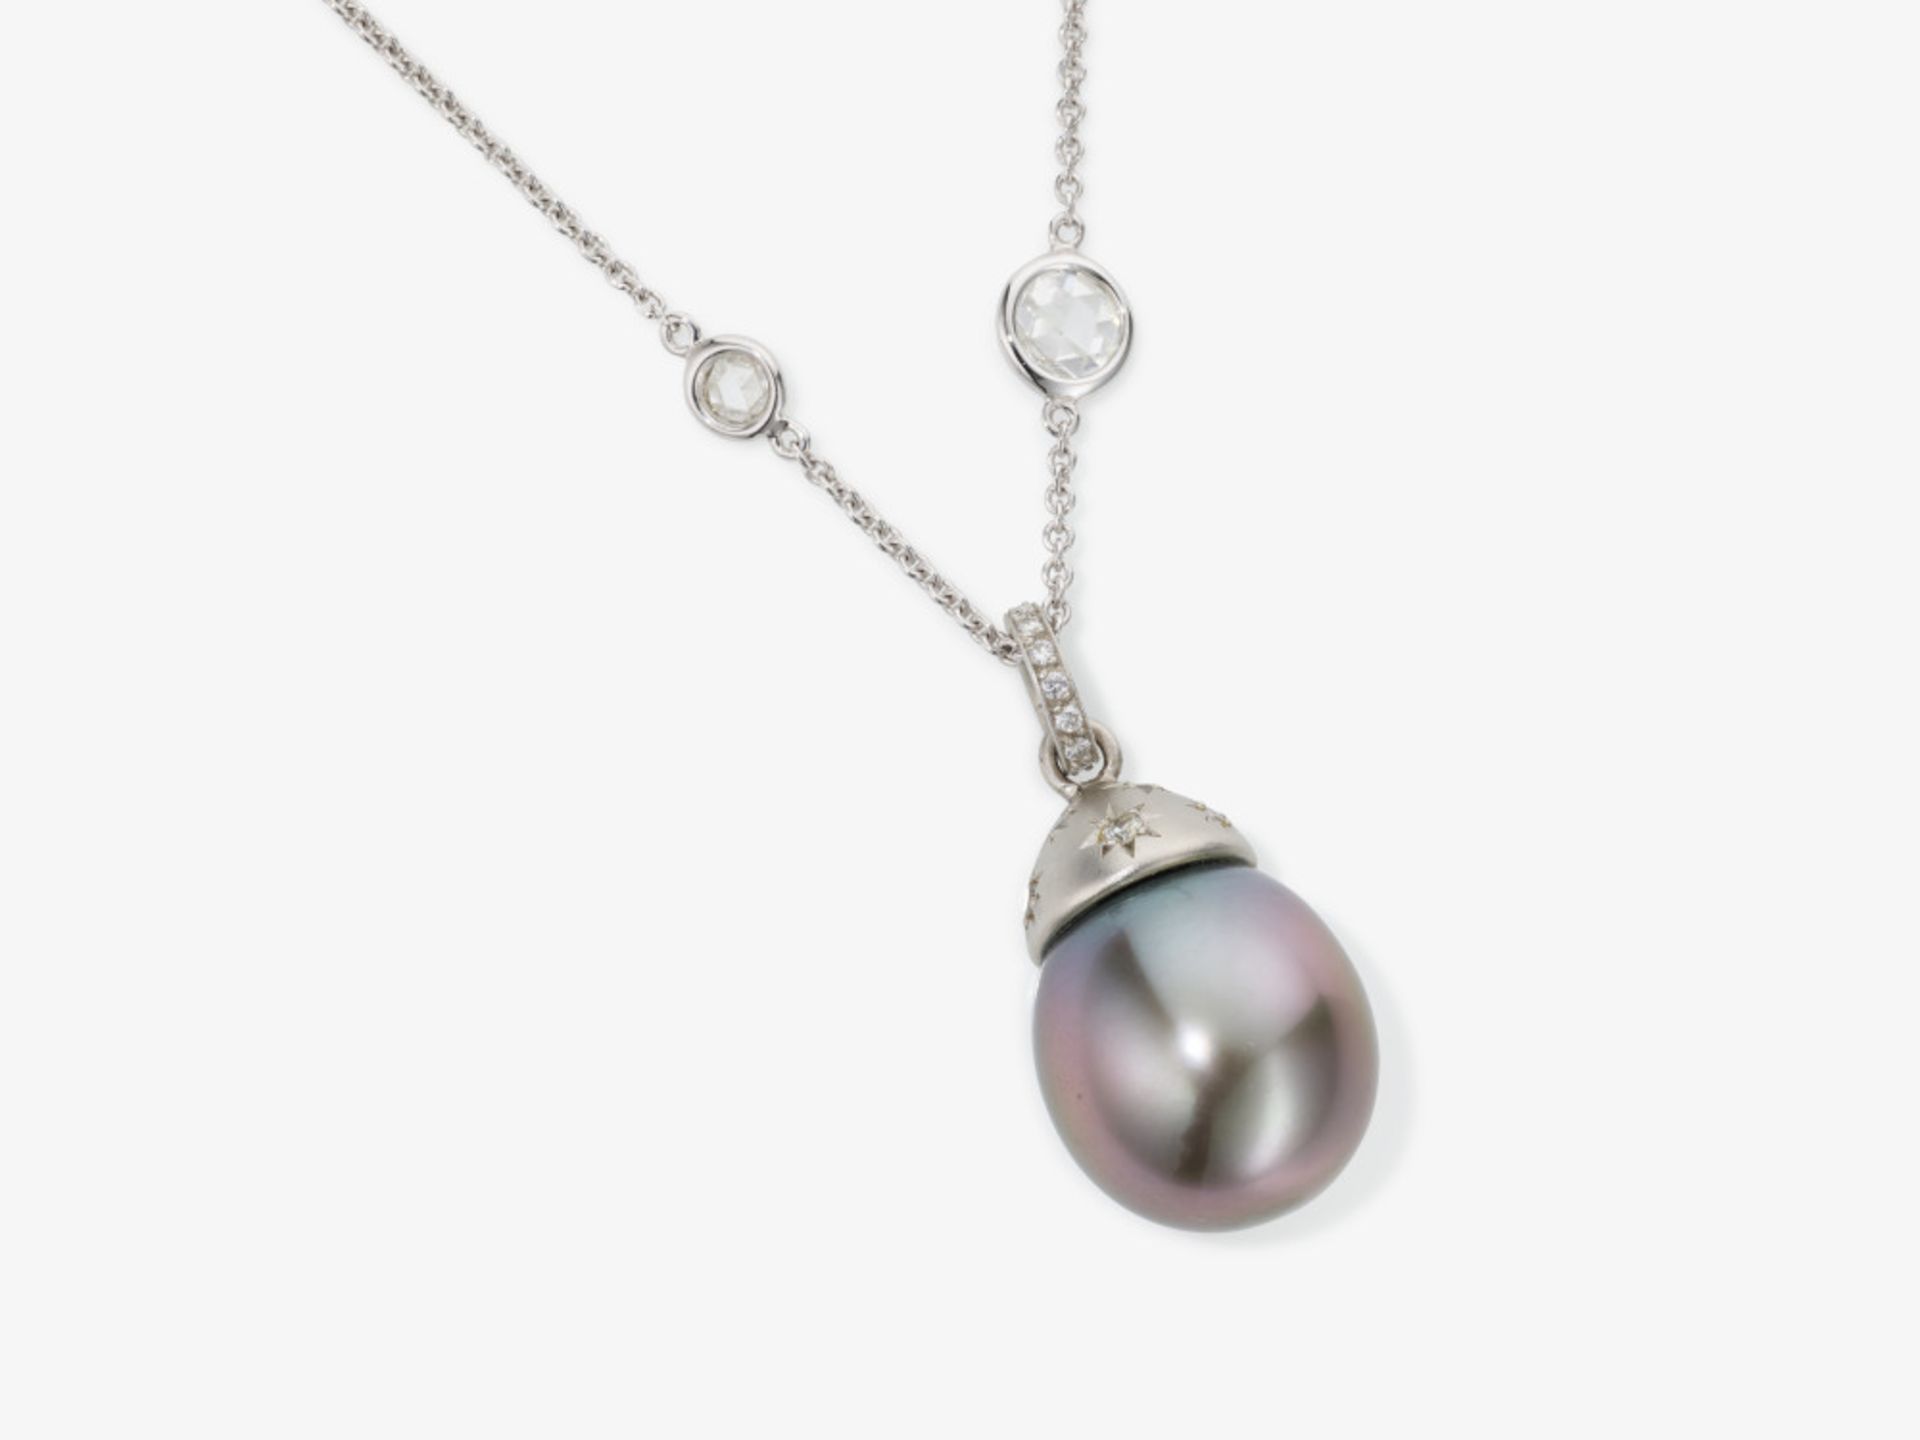 A delicate link chain necklace decorated with diamond roses and a South Sea Tahitian cultured pearl  - Image 2 of 4